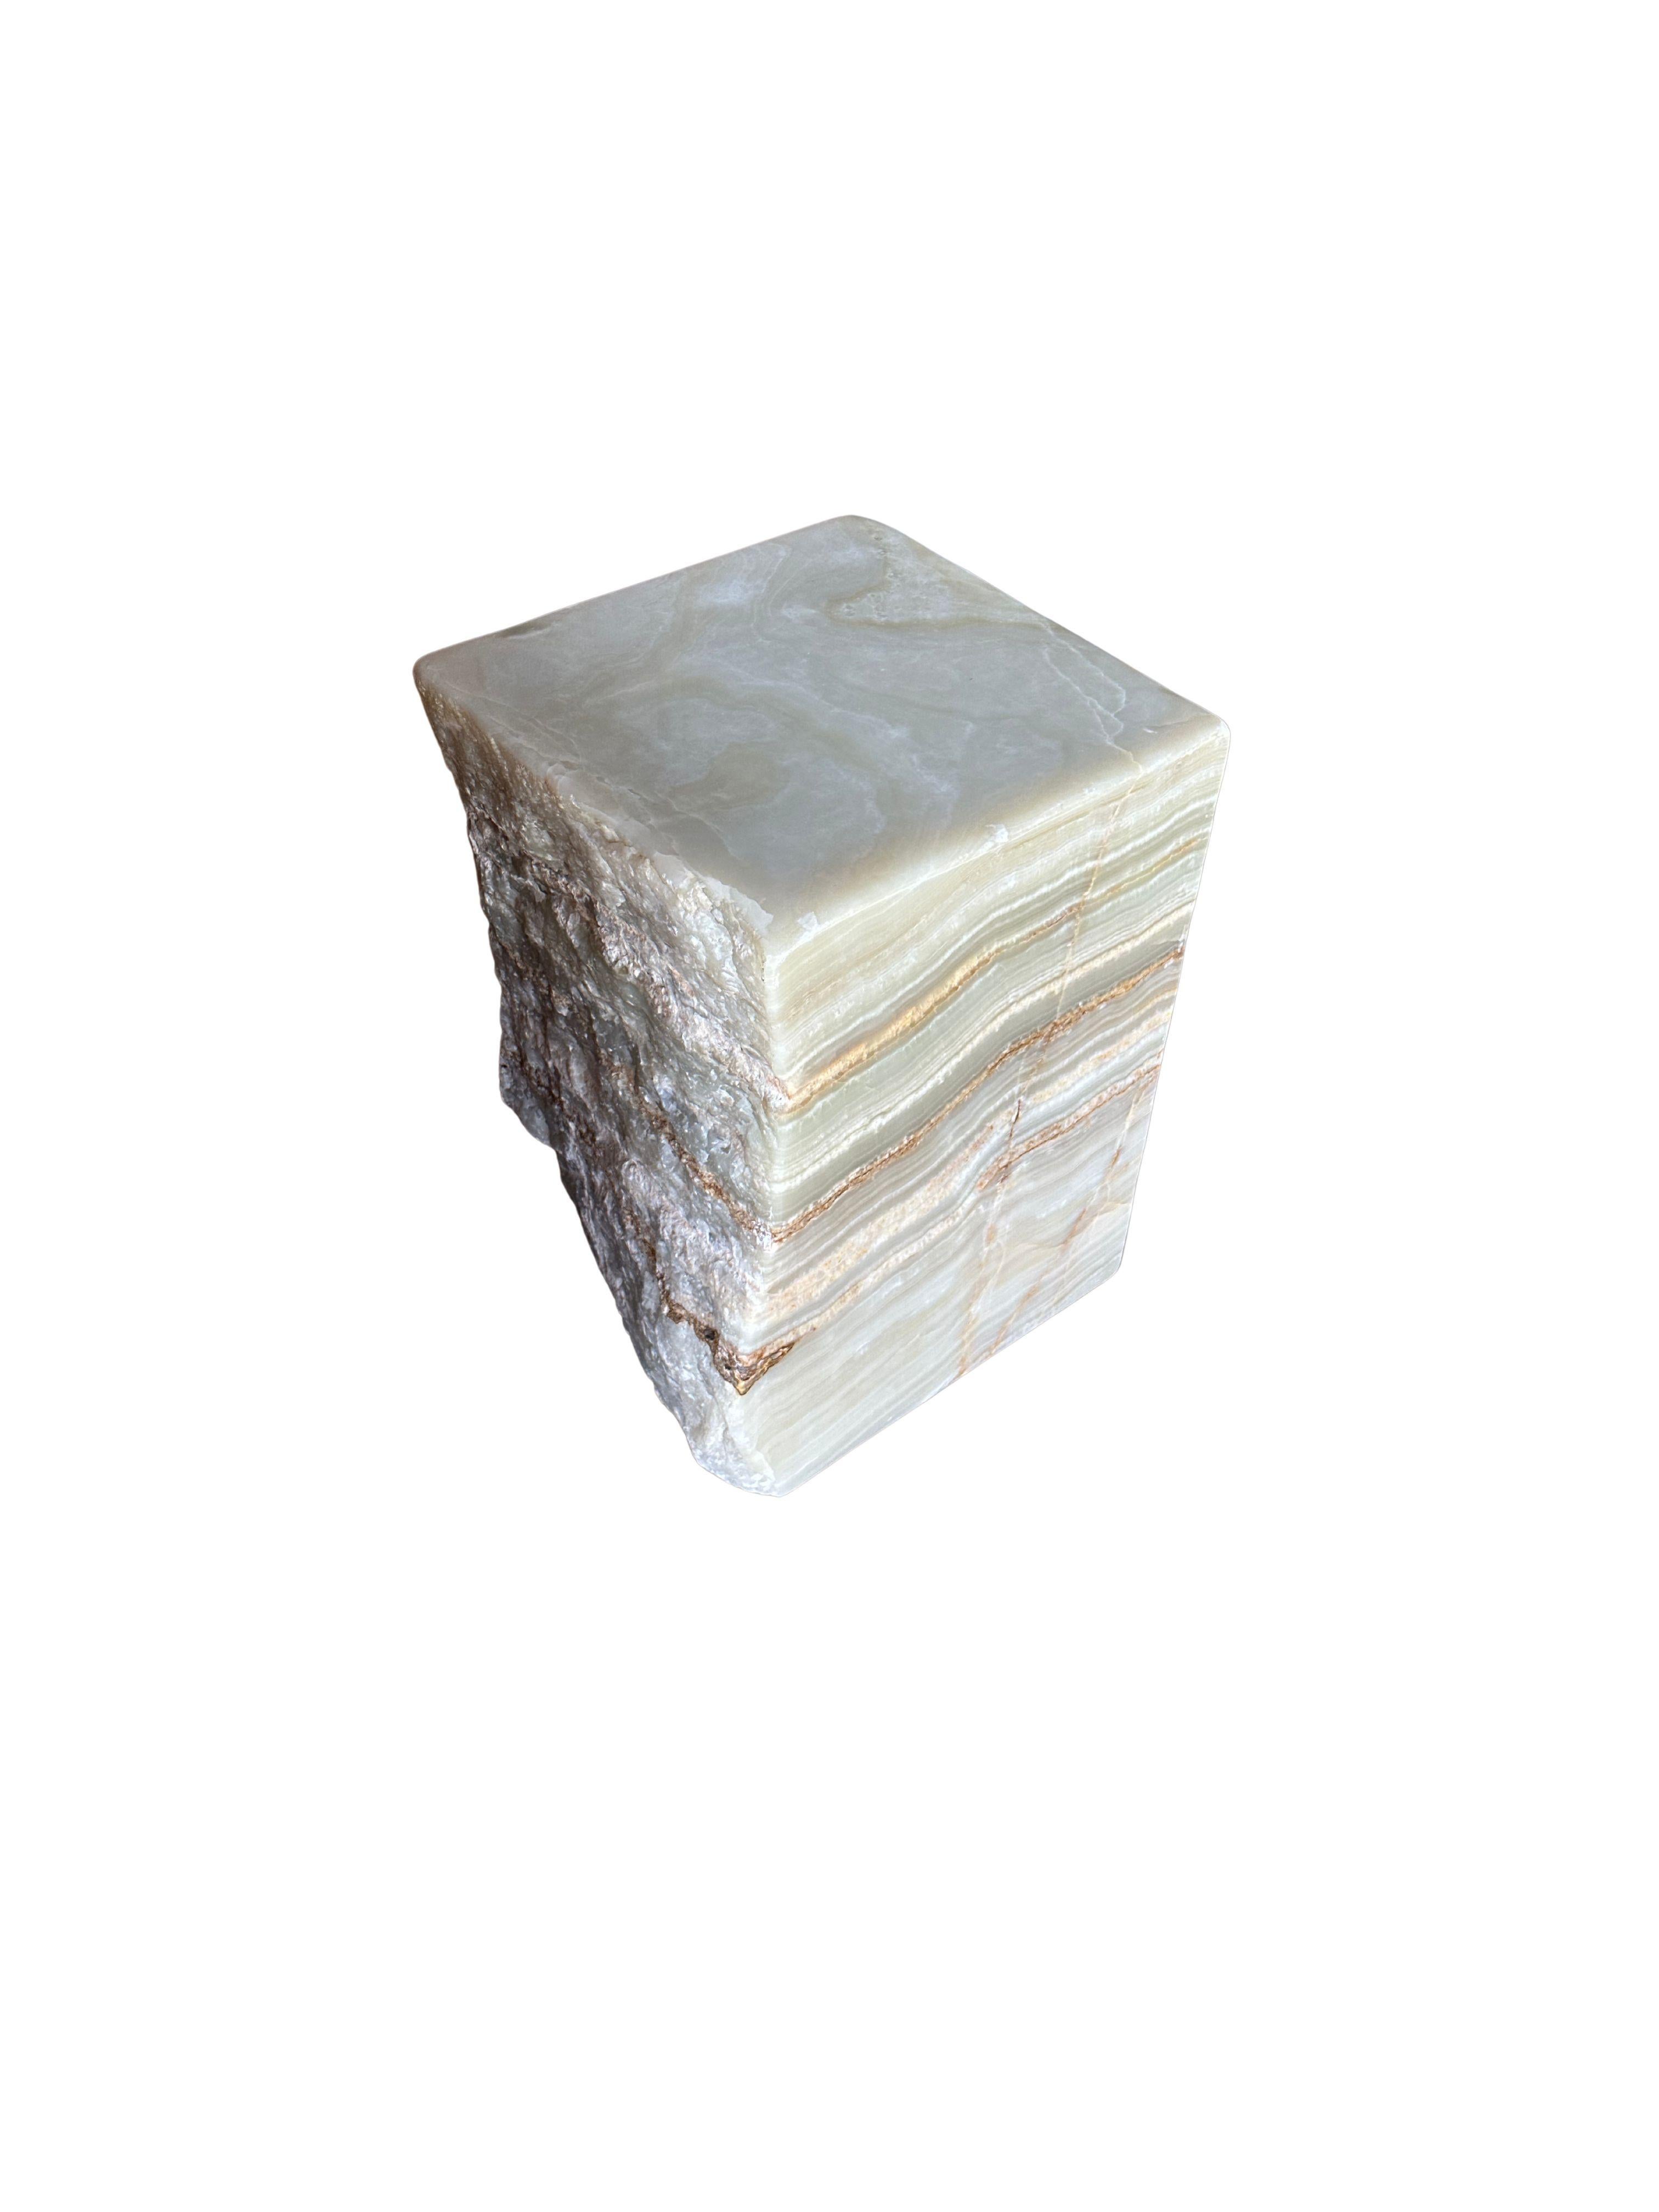 Organic Modern Jupiter Onyx Marble Side Table with Stunning Textures, Modern Organic For Sale